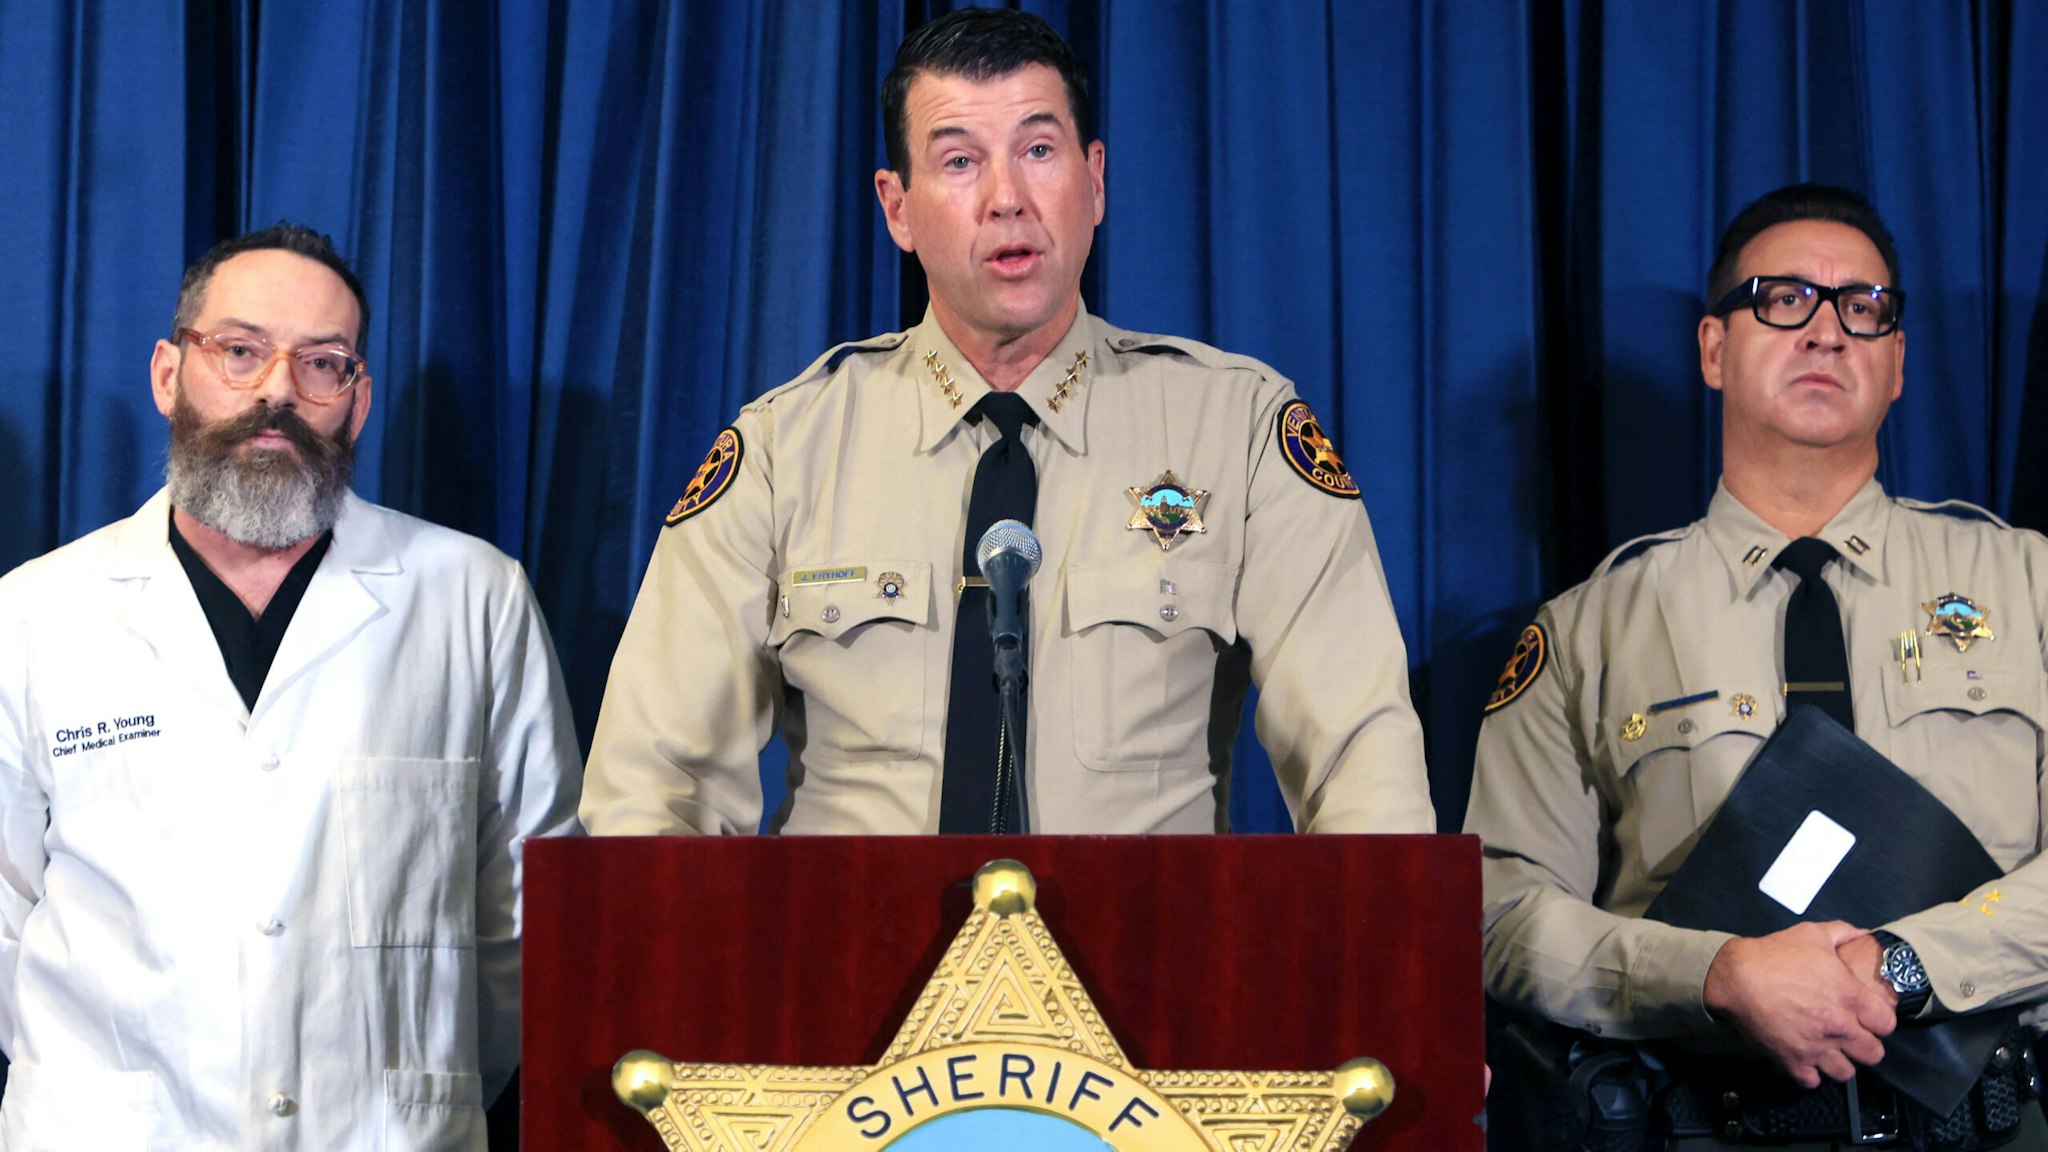 Ventura County Sheriff James Fryhoff speaks during a press conference in Thousand Oaks, California, on November 7, 2023, about the death of Paul Kessler. Law enforcement officials in California said November 6 they were investigating the death of Kessler, 69, a Jewish man, who died after an altercation at dueling pro-Israel and pro-Palestinian rallies.